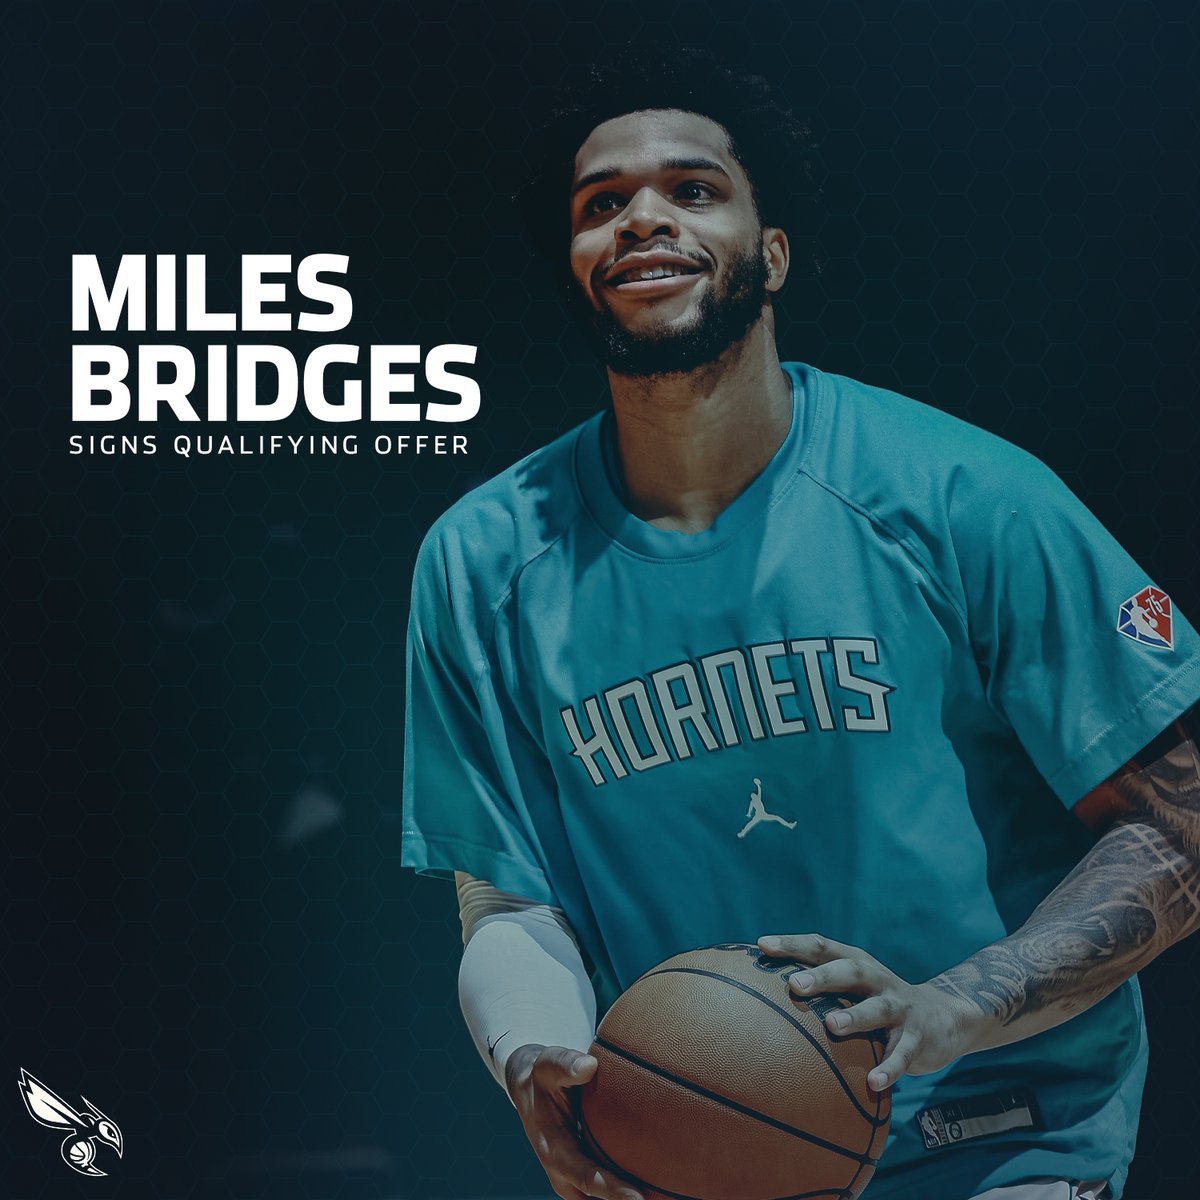 OFFICIAL: Miles Bridges has signed his Qualifying Offer and will play for us on a one-year contract for the 2023-24 season. Read for Full Release: on.nba.com/3NFFC53